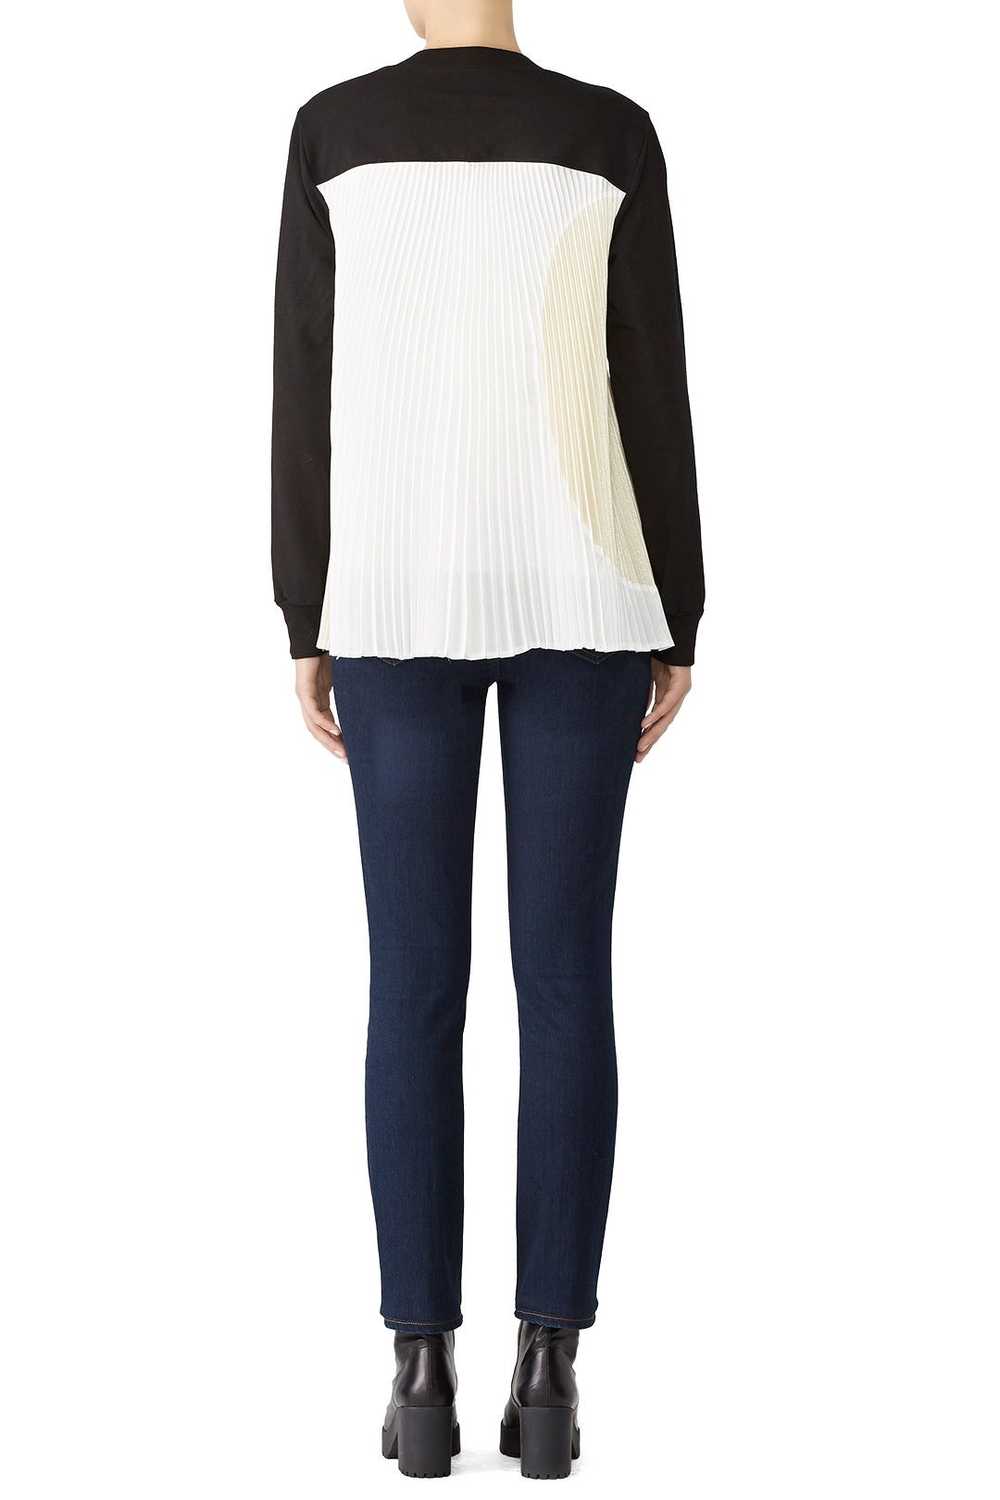 Clu Paneled Pleating Pullover - image 2